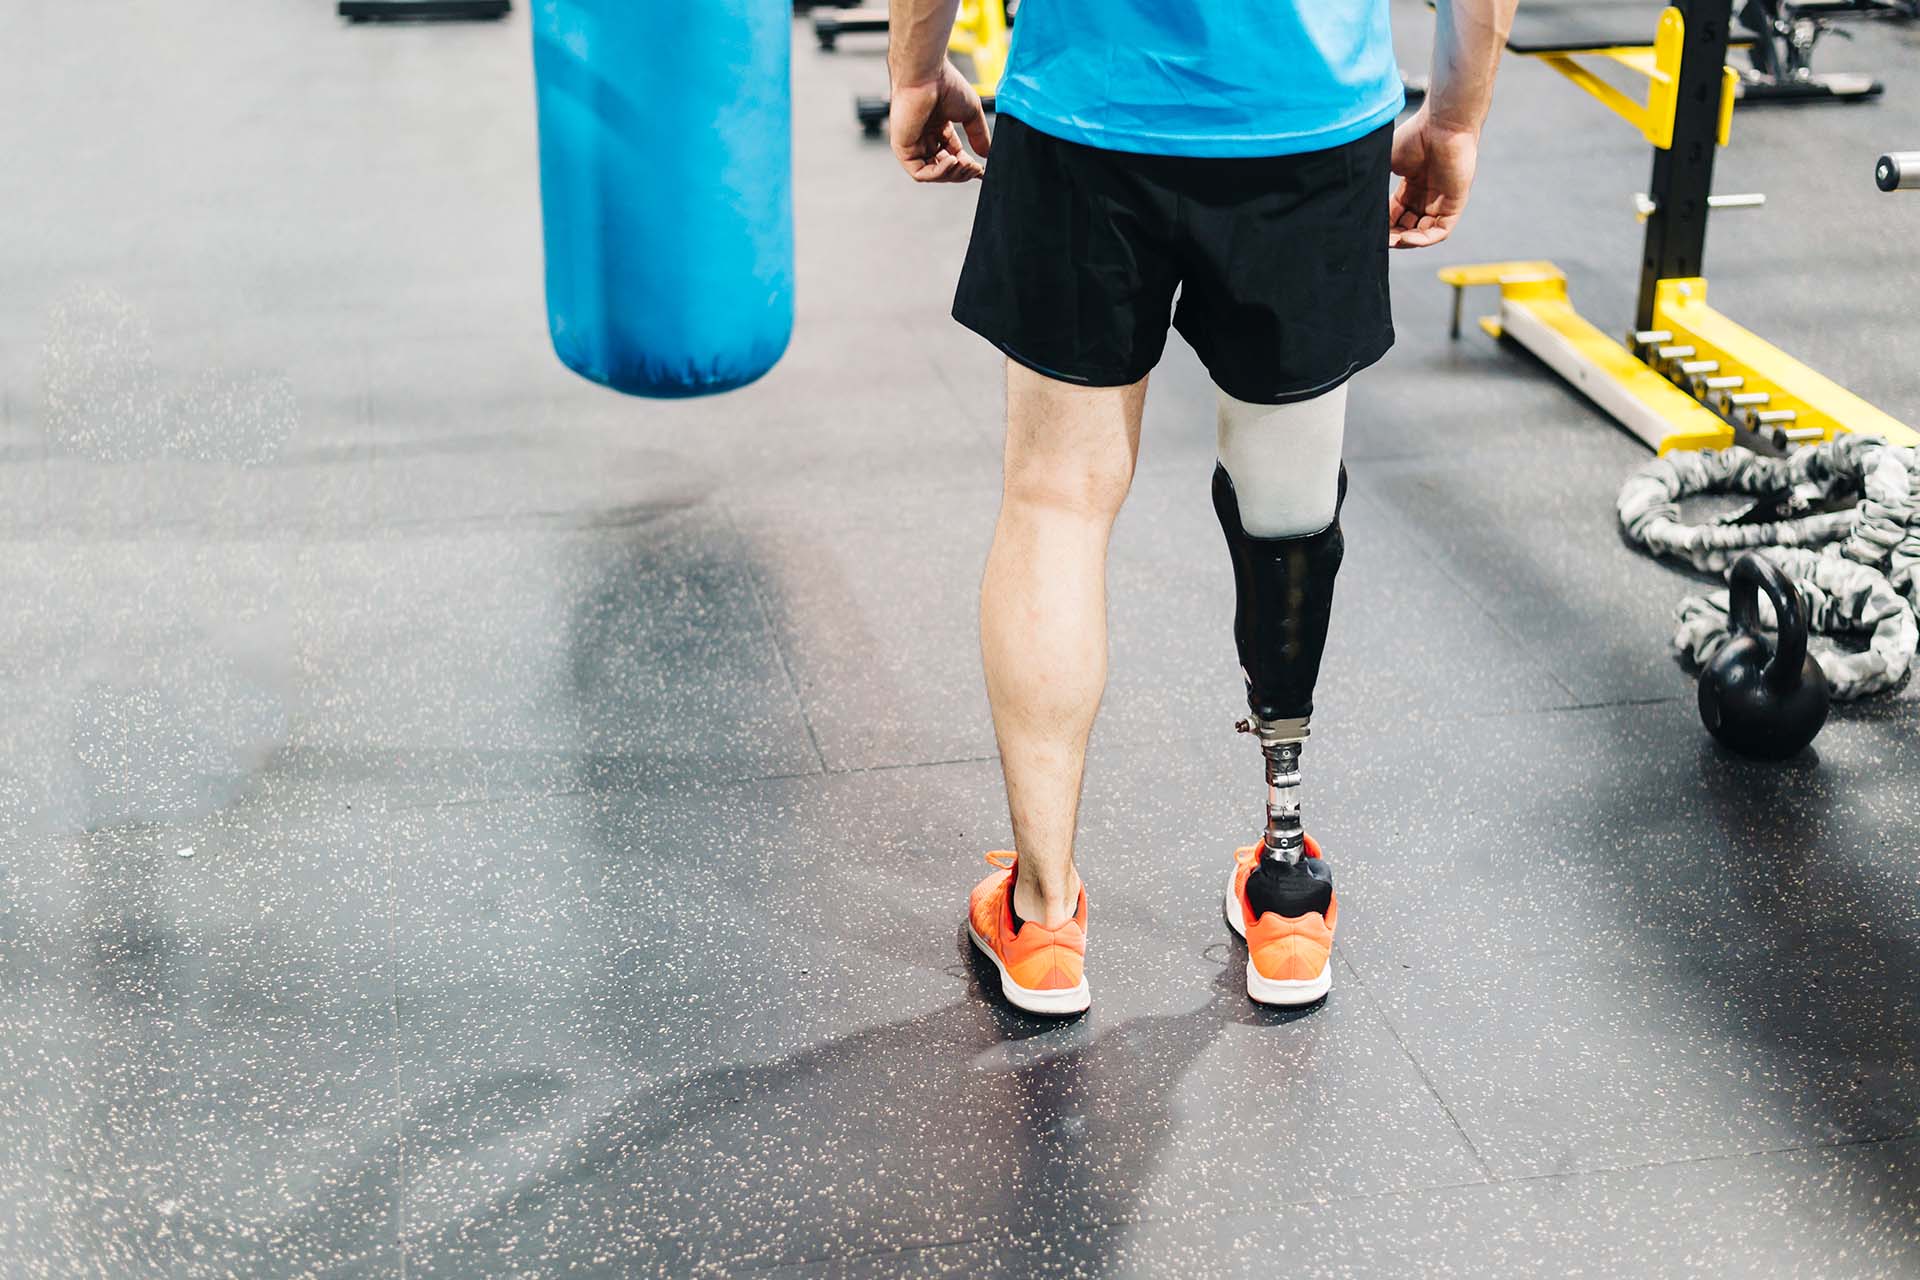 Athlete with leg prosthesis training at the gym